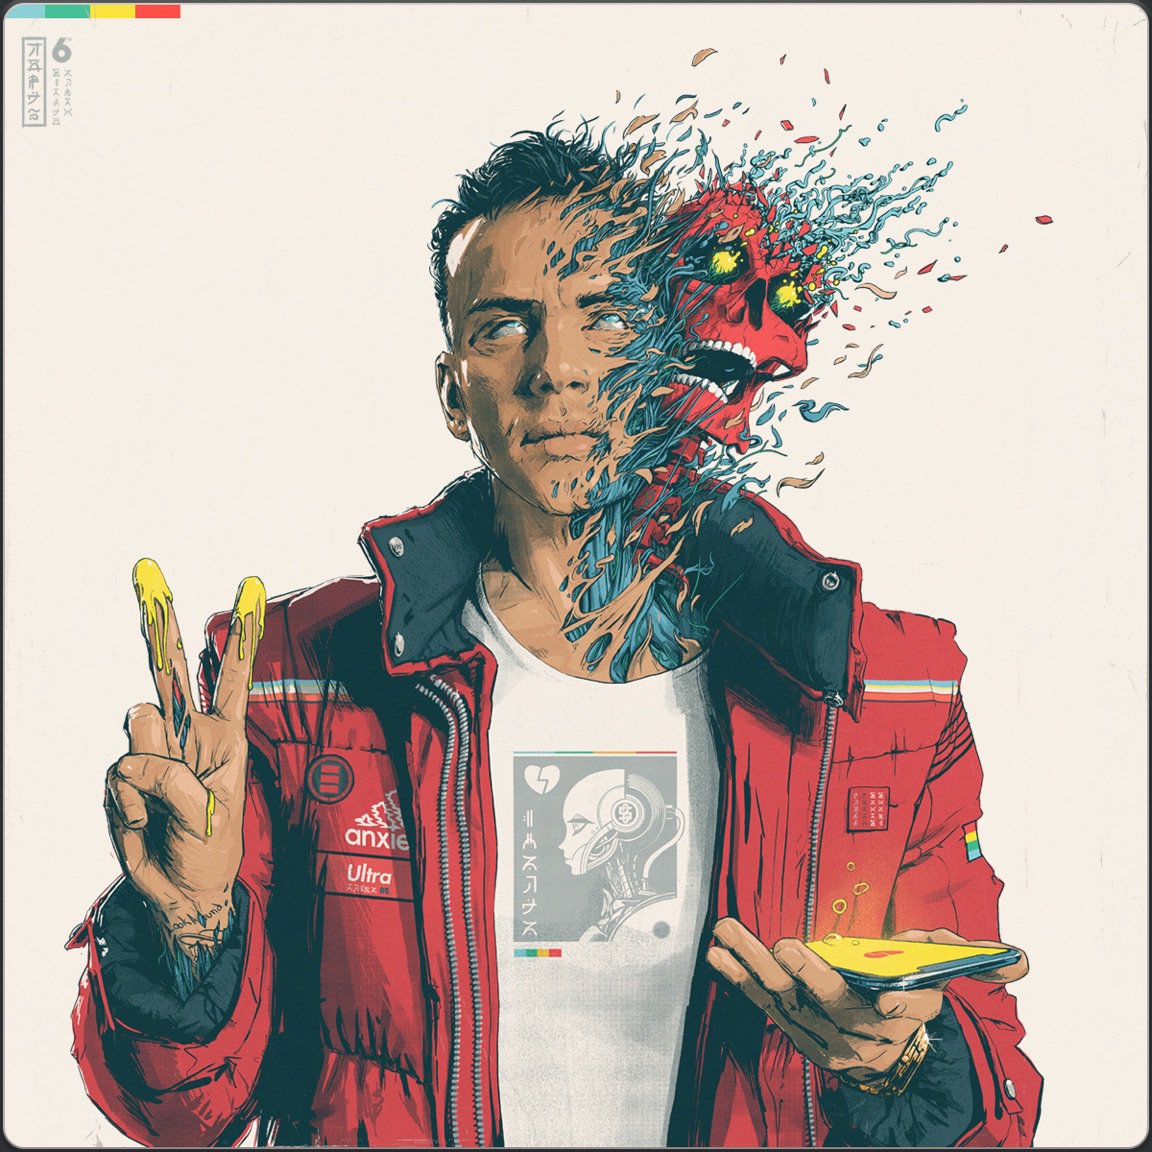 Stream Logic's New Album 'Confessions of A Dangerous Mind' | HipHop-N-More